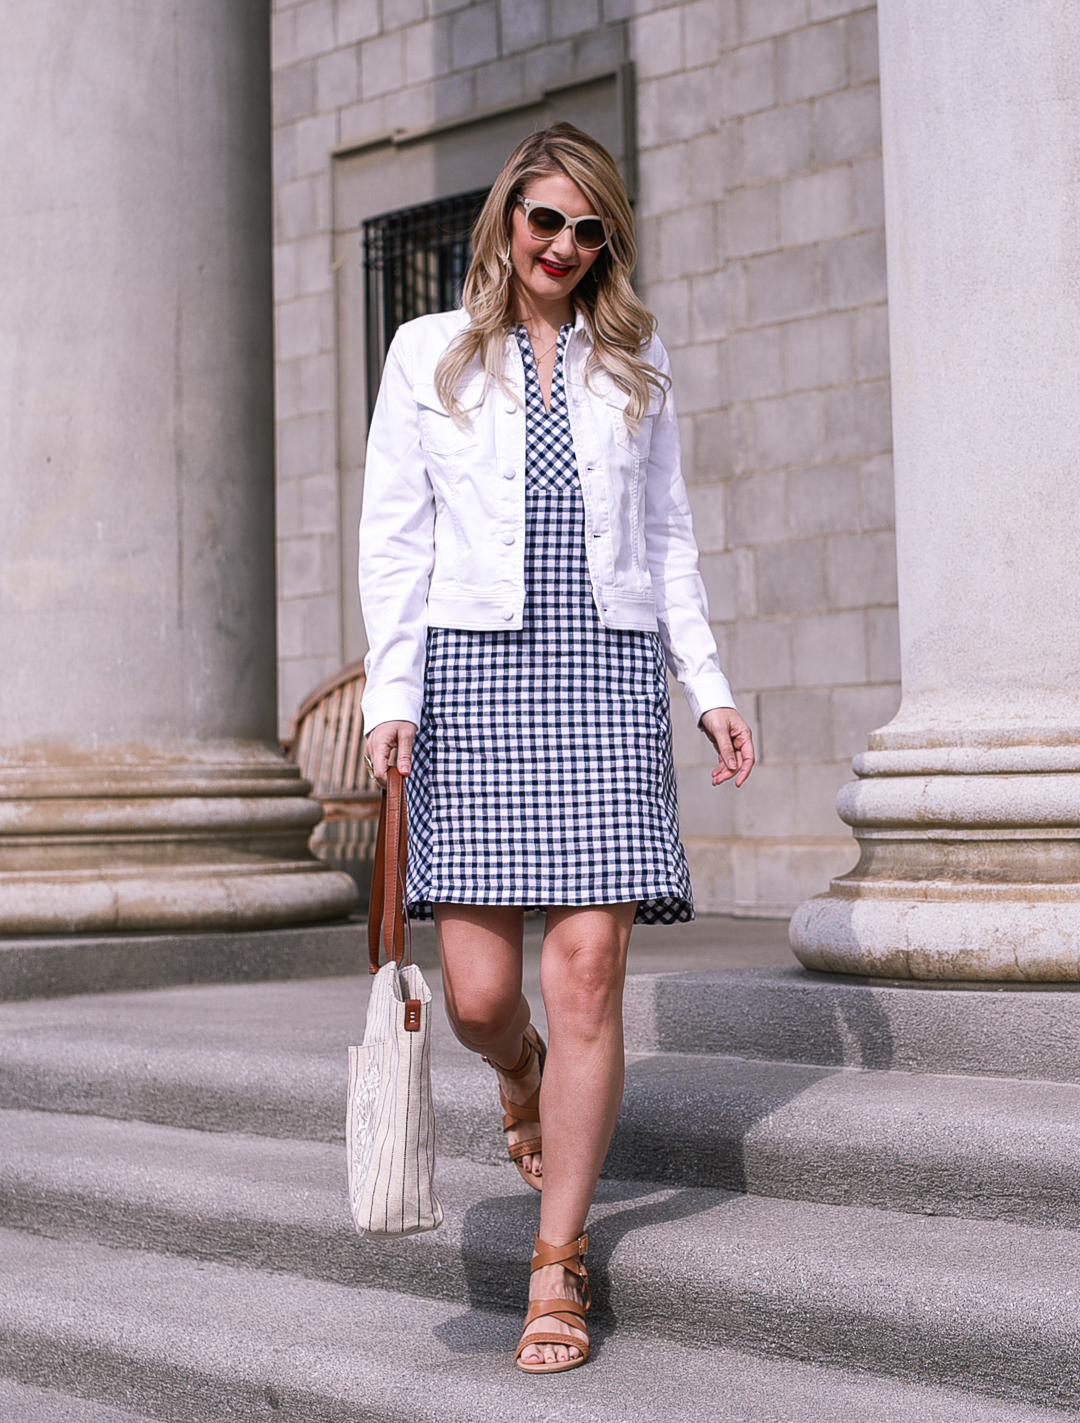 Gingham shift dress in linen with summer sandals. 